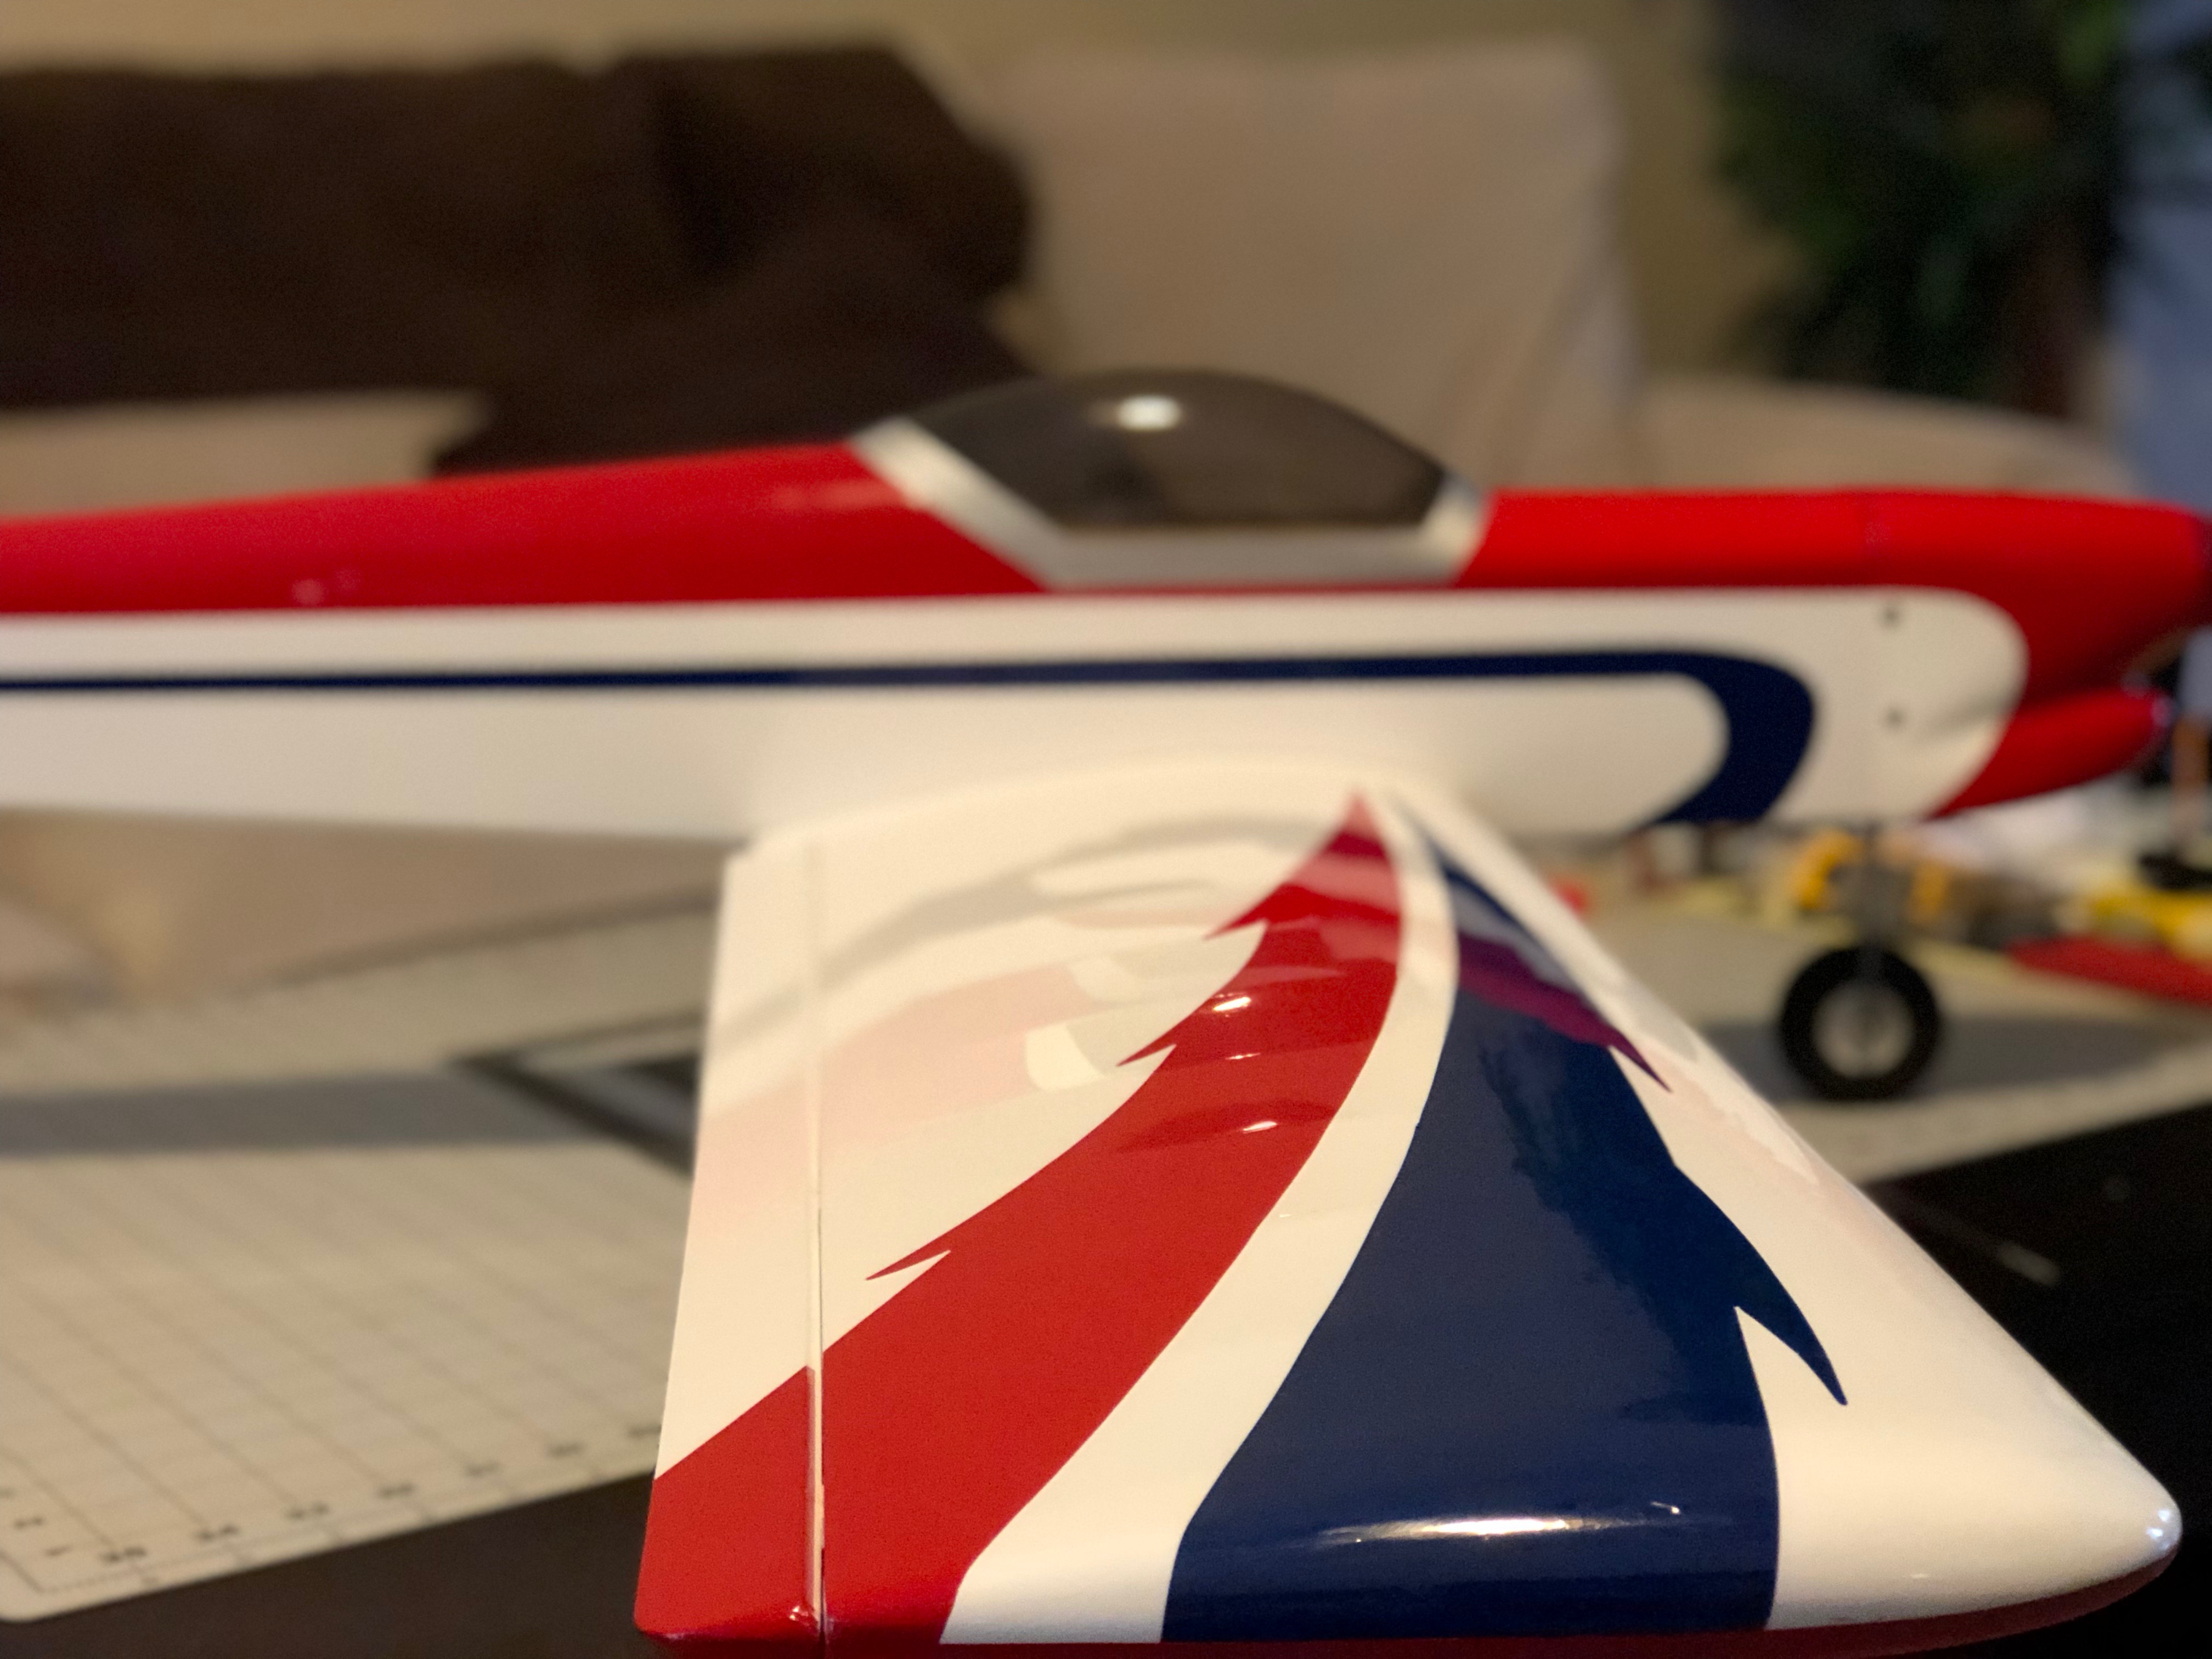 tower hobby rc airplanes